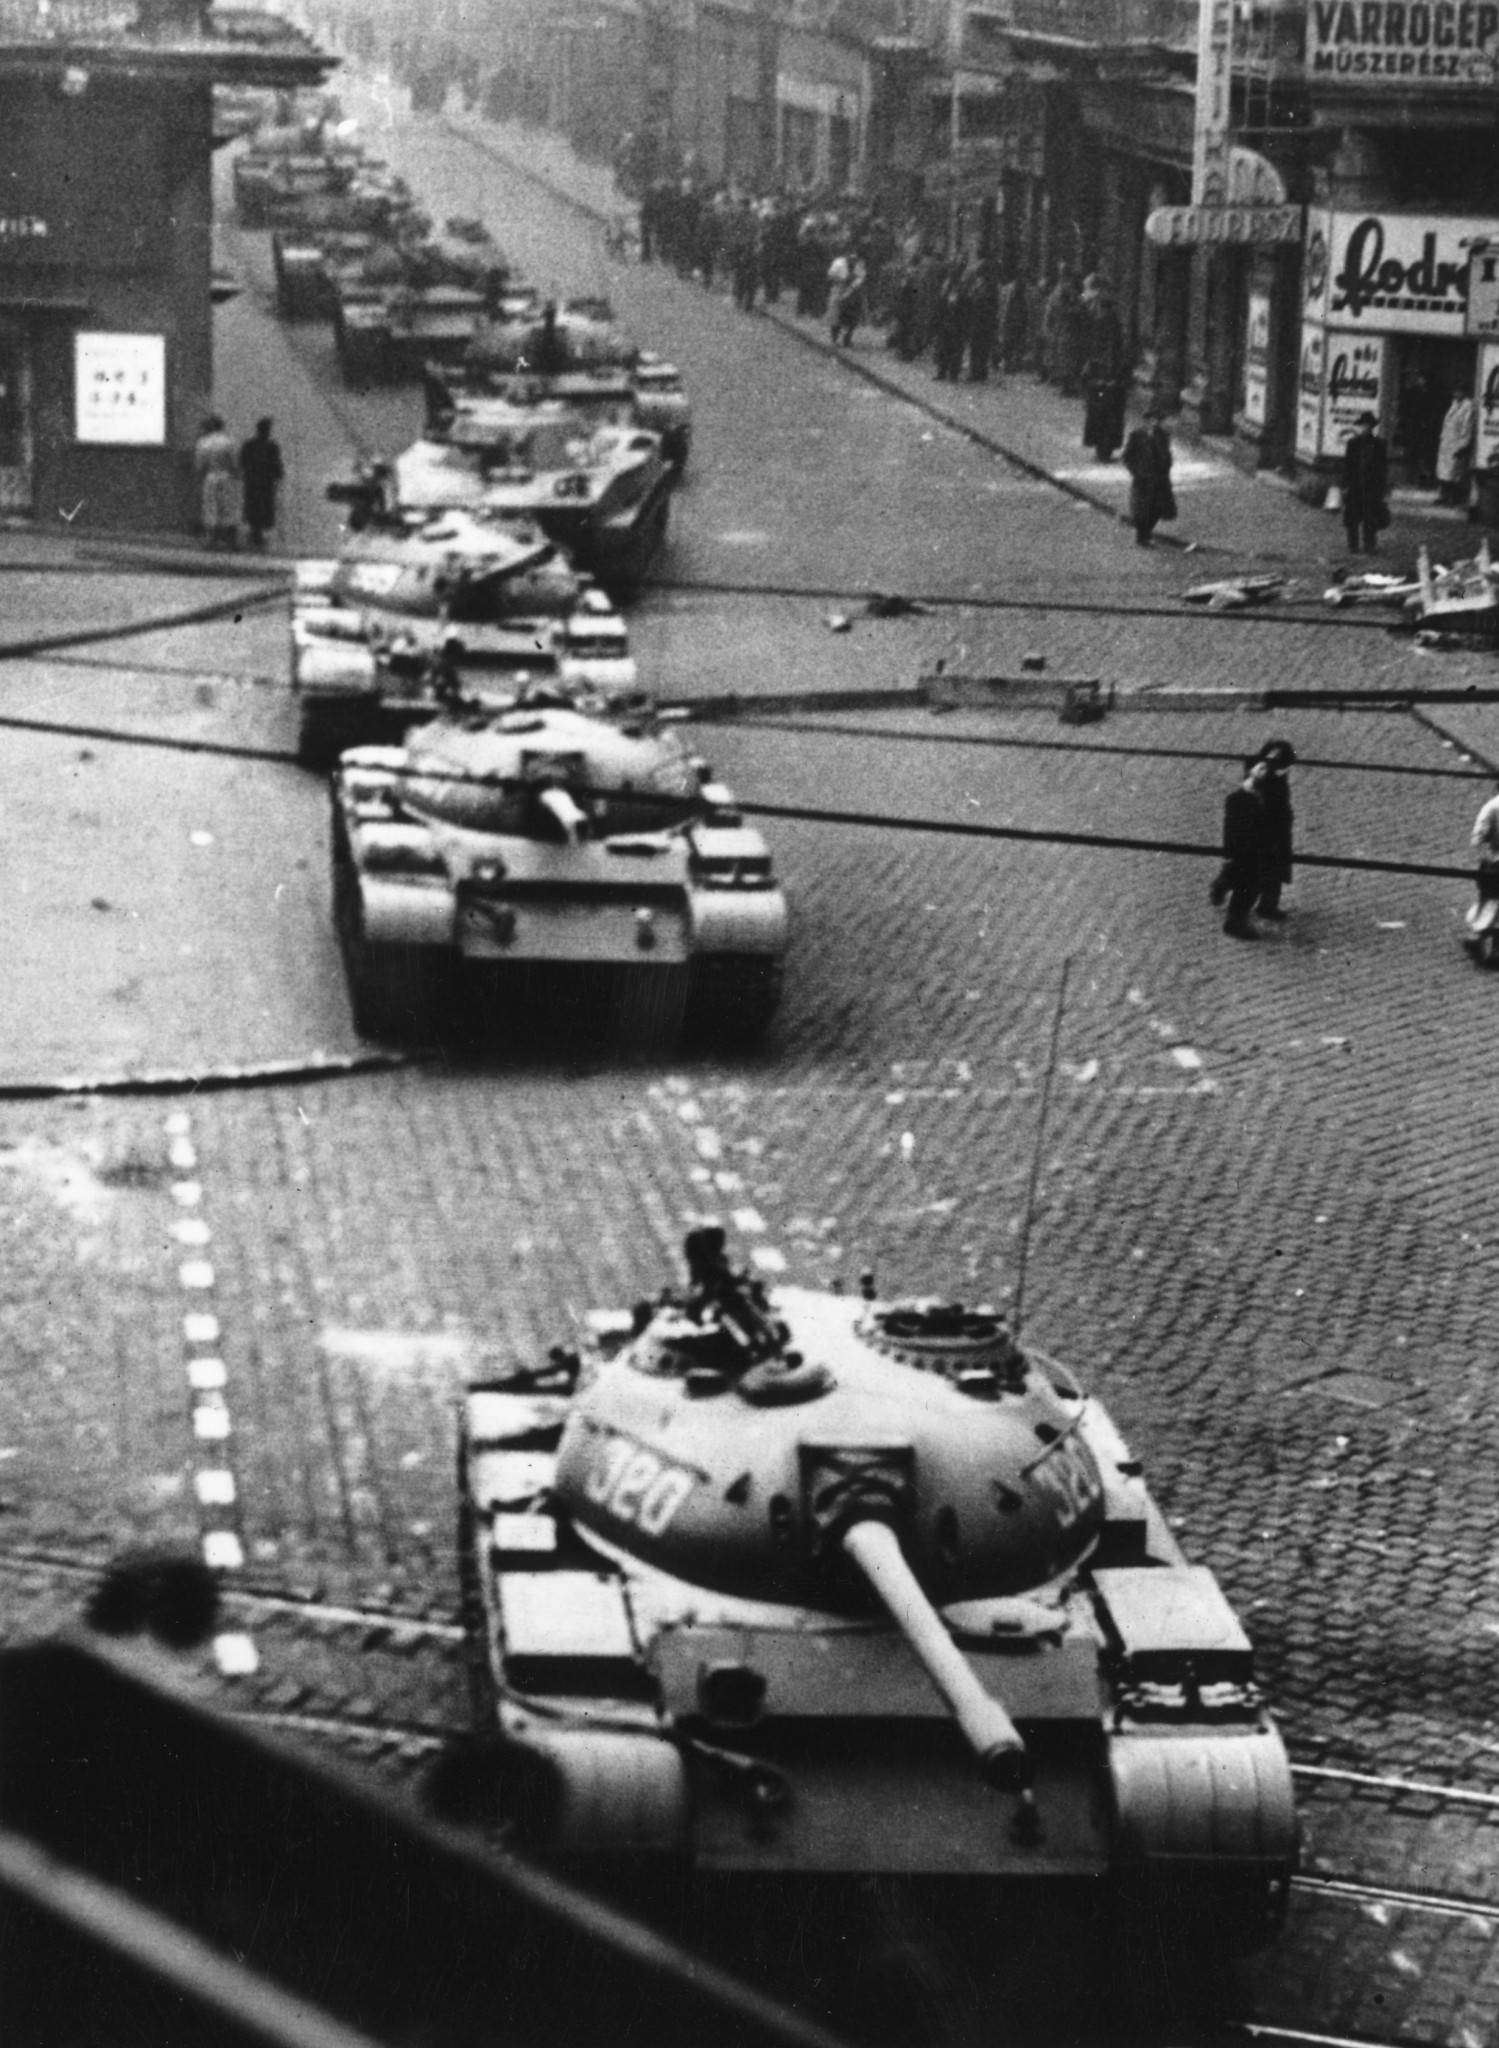 Soviet tanks were ordered onto the streets of Budapest to quell the Hungarian uprising in 1956 ©Getty Images